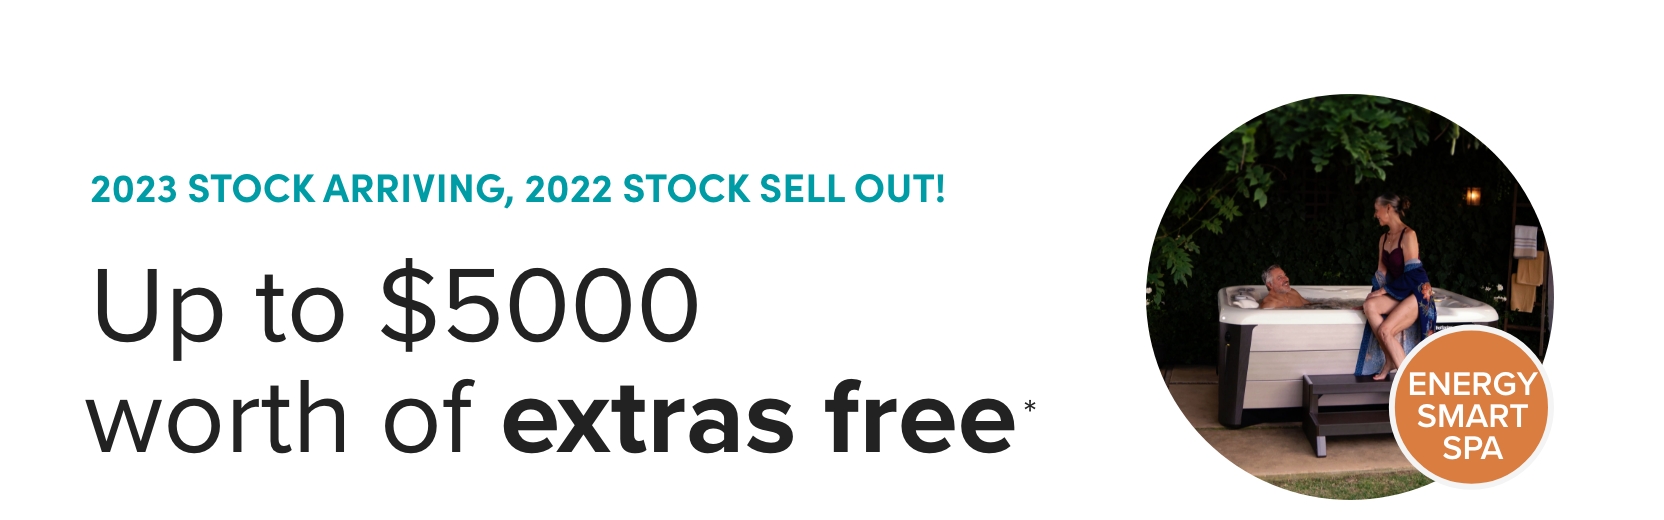 Up to $5000 worth of extras free